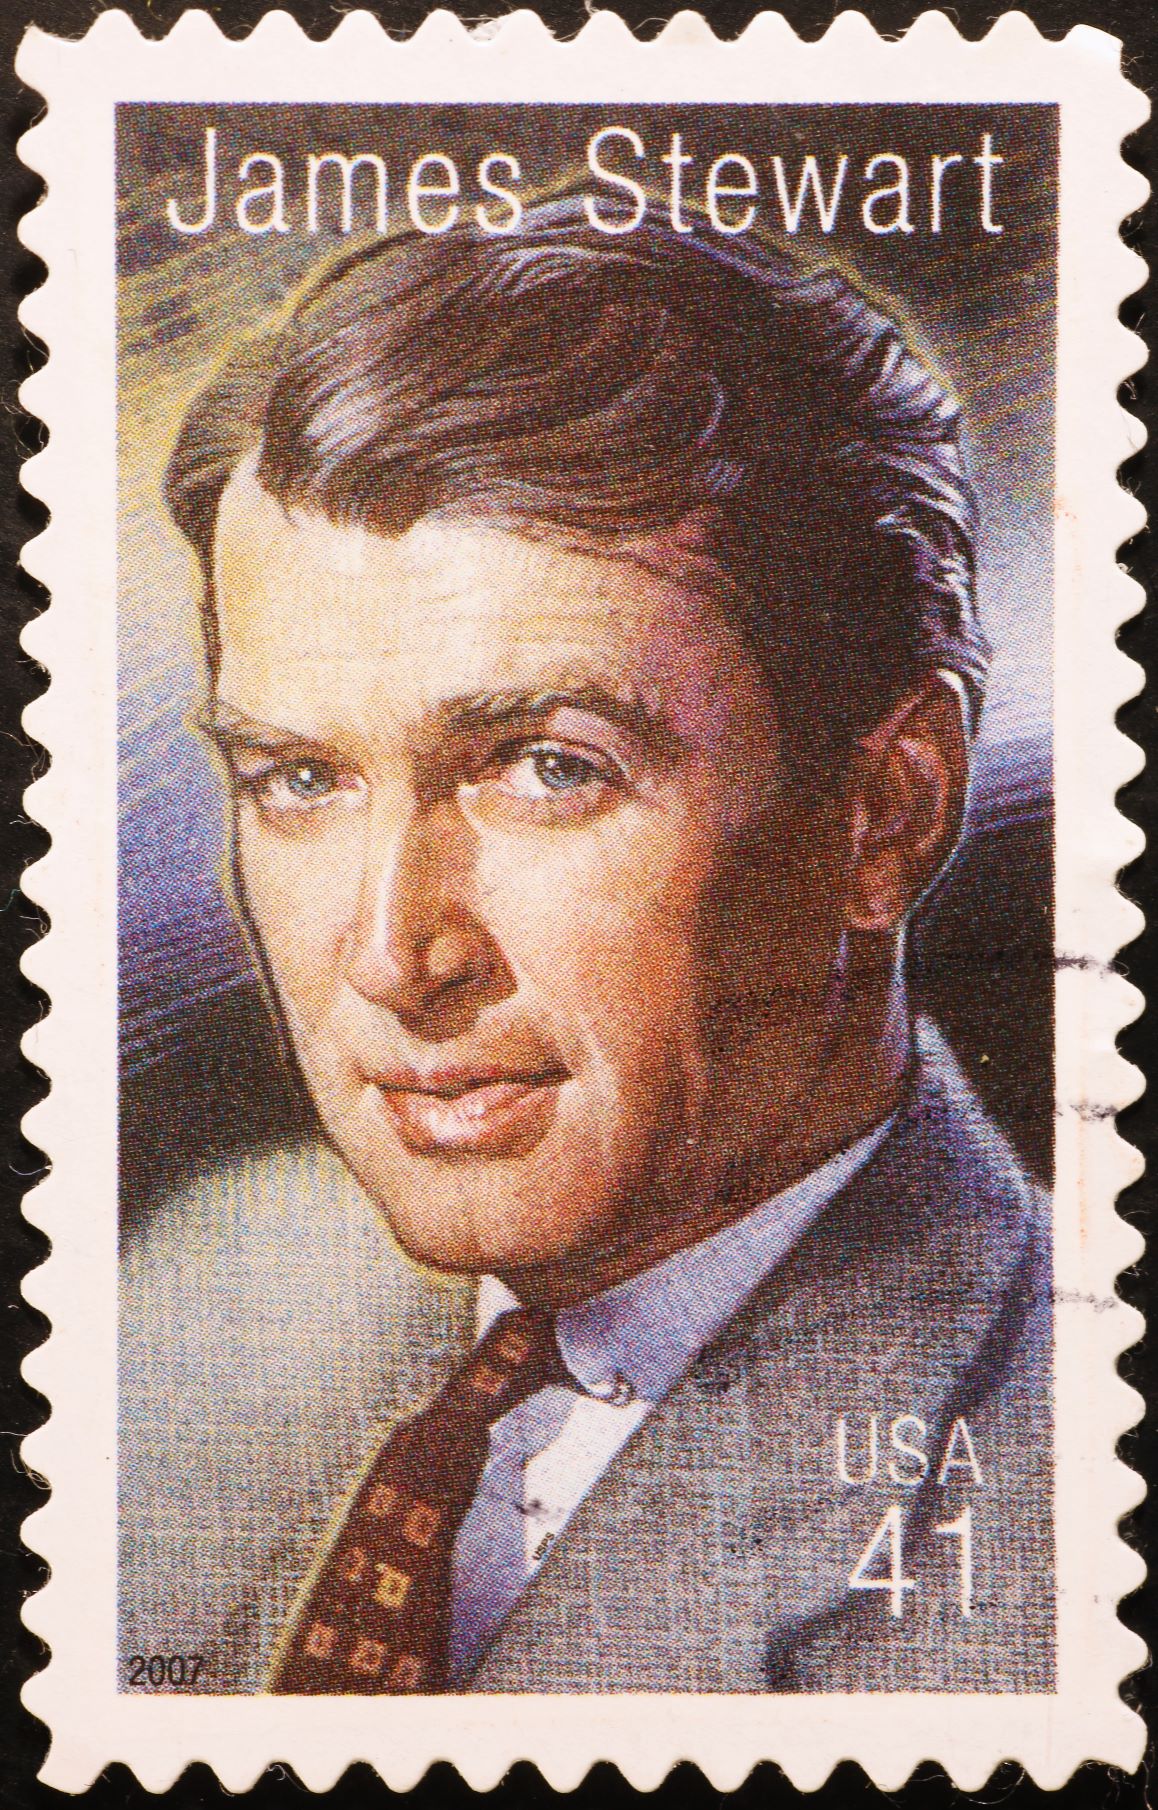 Postage stamp featuring the portrait of James Stew